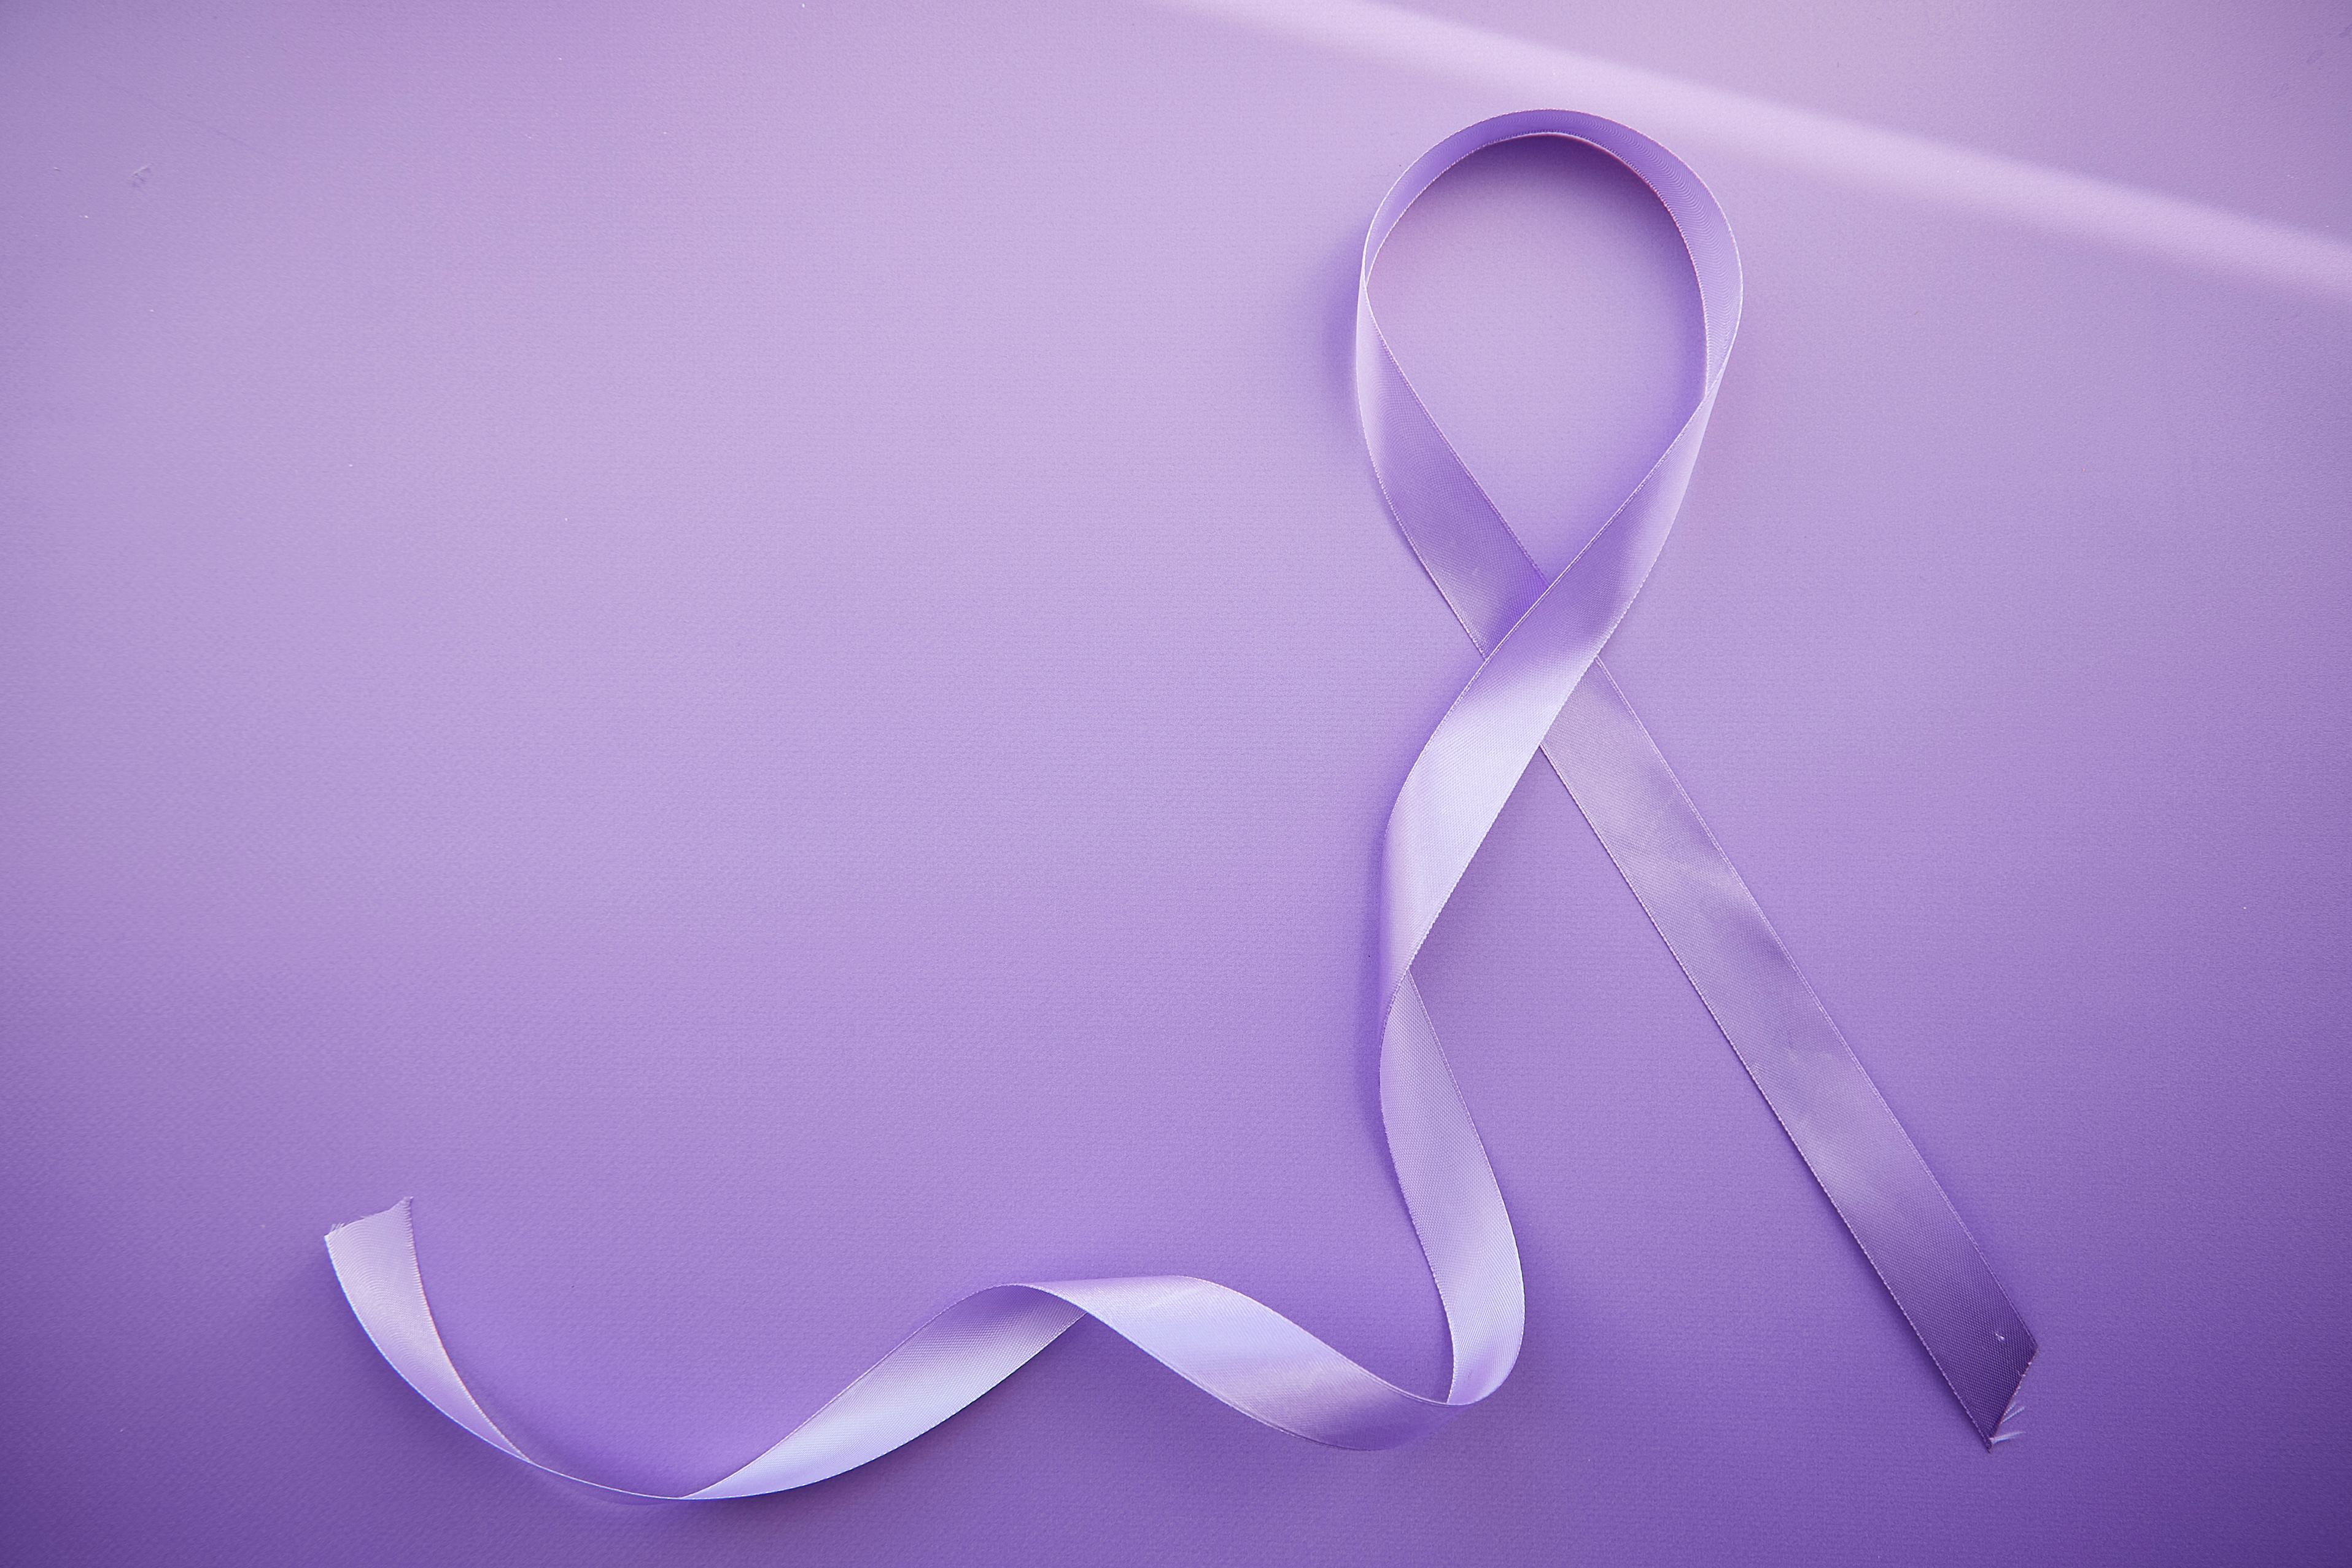 Purple ribbon for Purple Day - World Epilepsy Day, March of 26. Symbol of Epilepsy Day on purple background with shadows